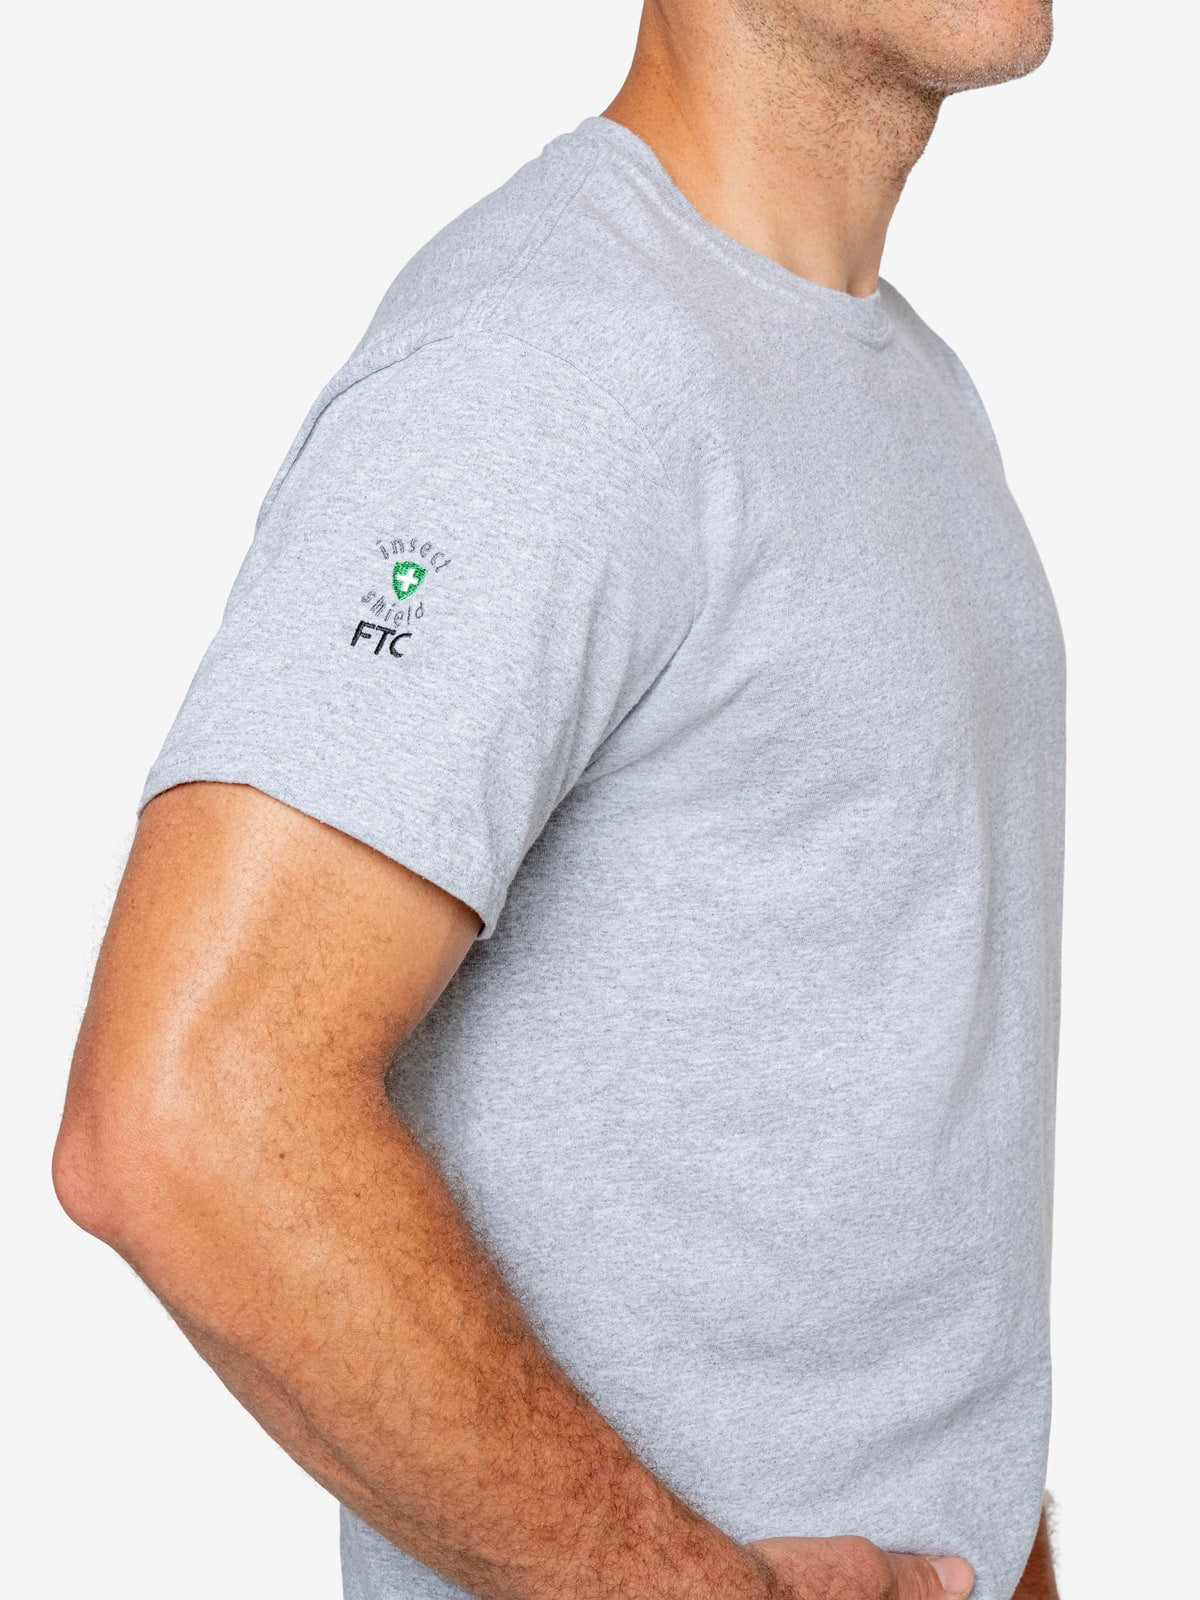 Insect Shield Men’s Basic Cotton T-Shirt